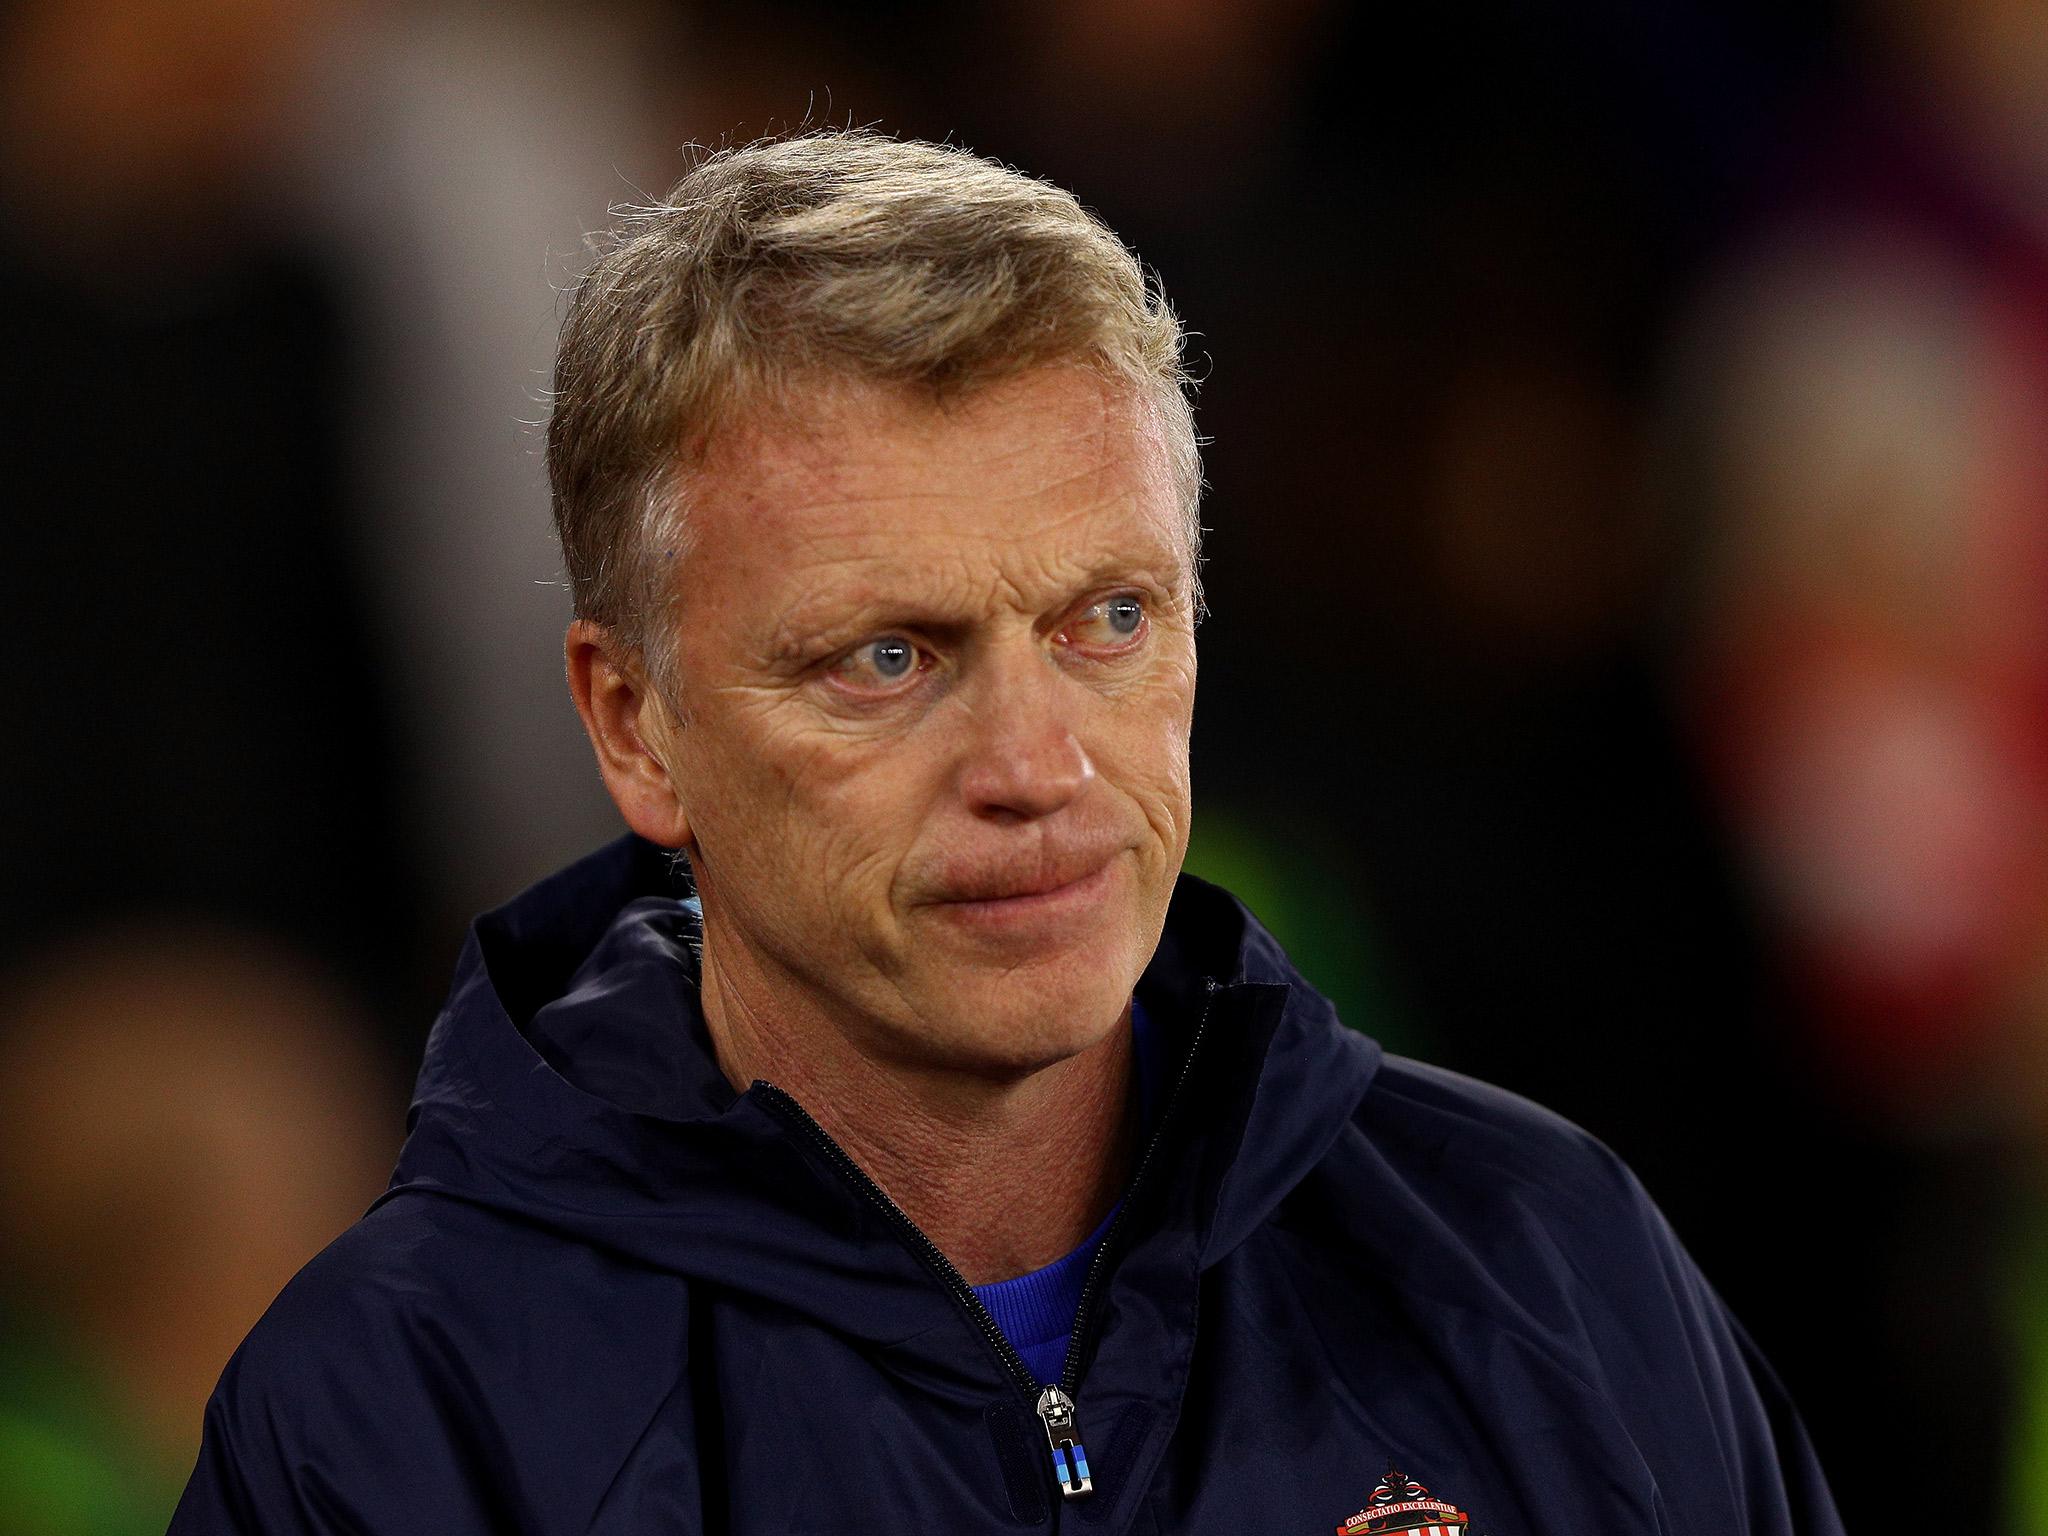 David Moyes knows there is pressure to turn around Sunderland's woeful form this season